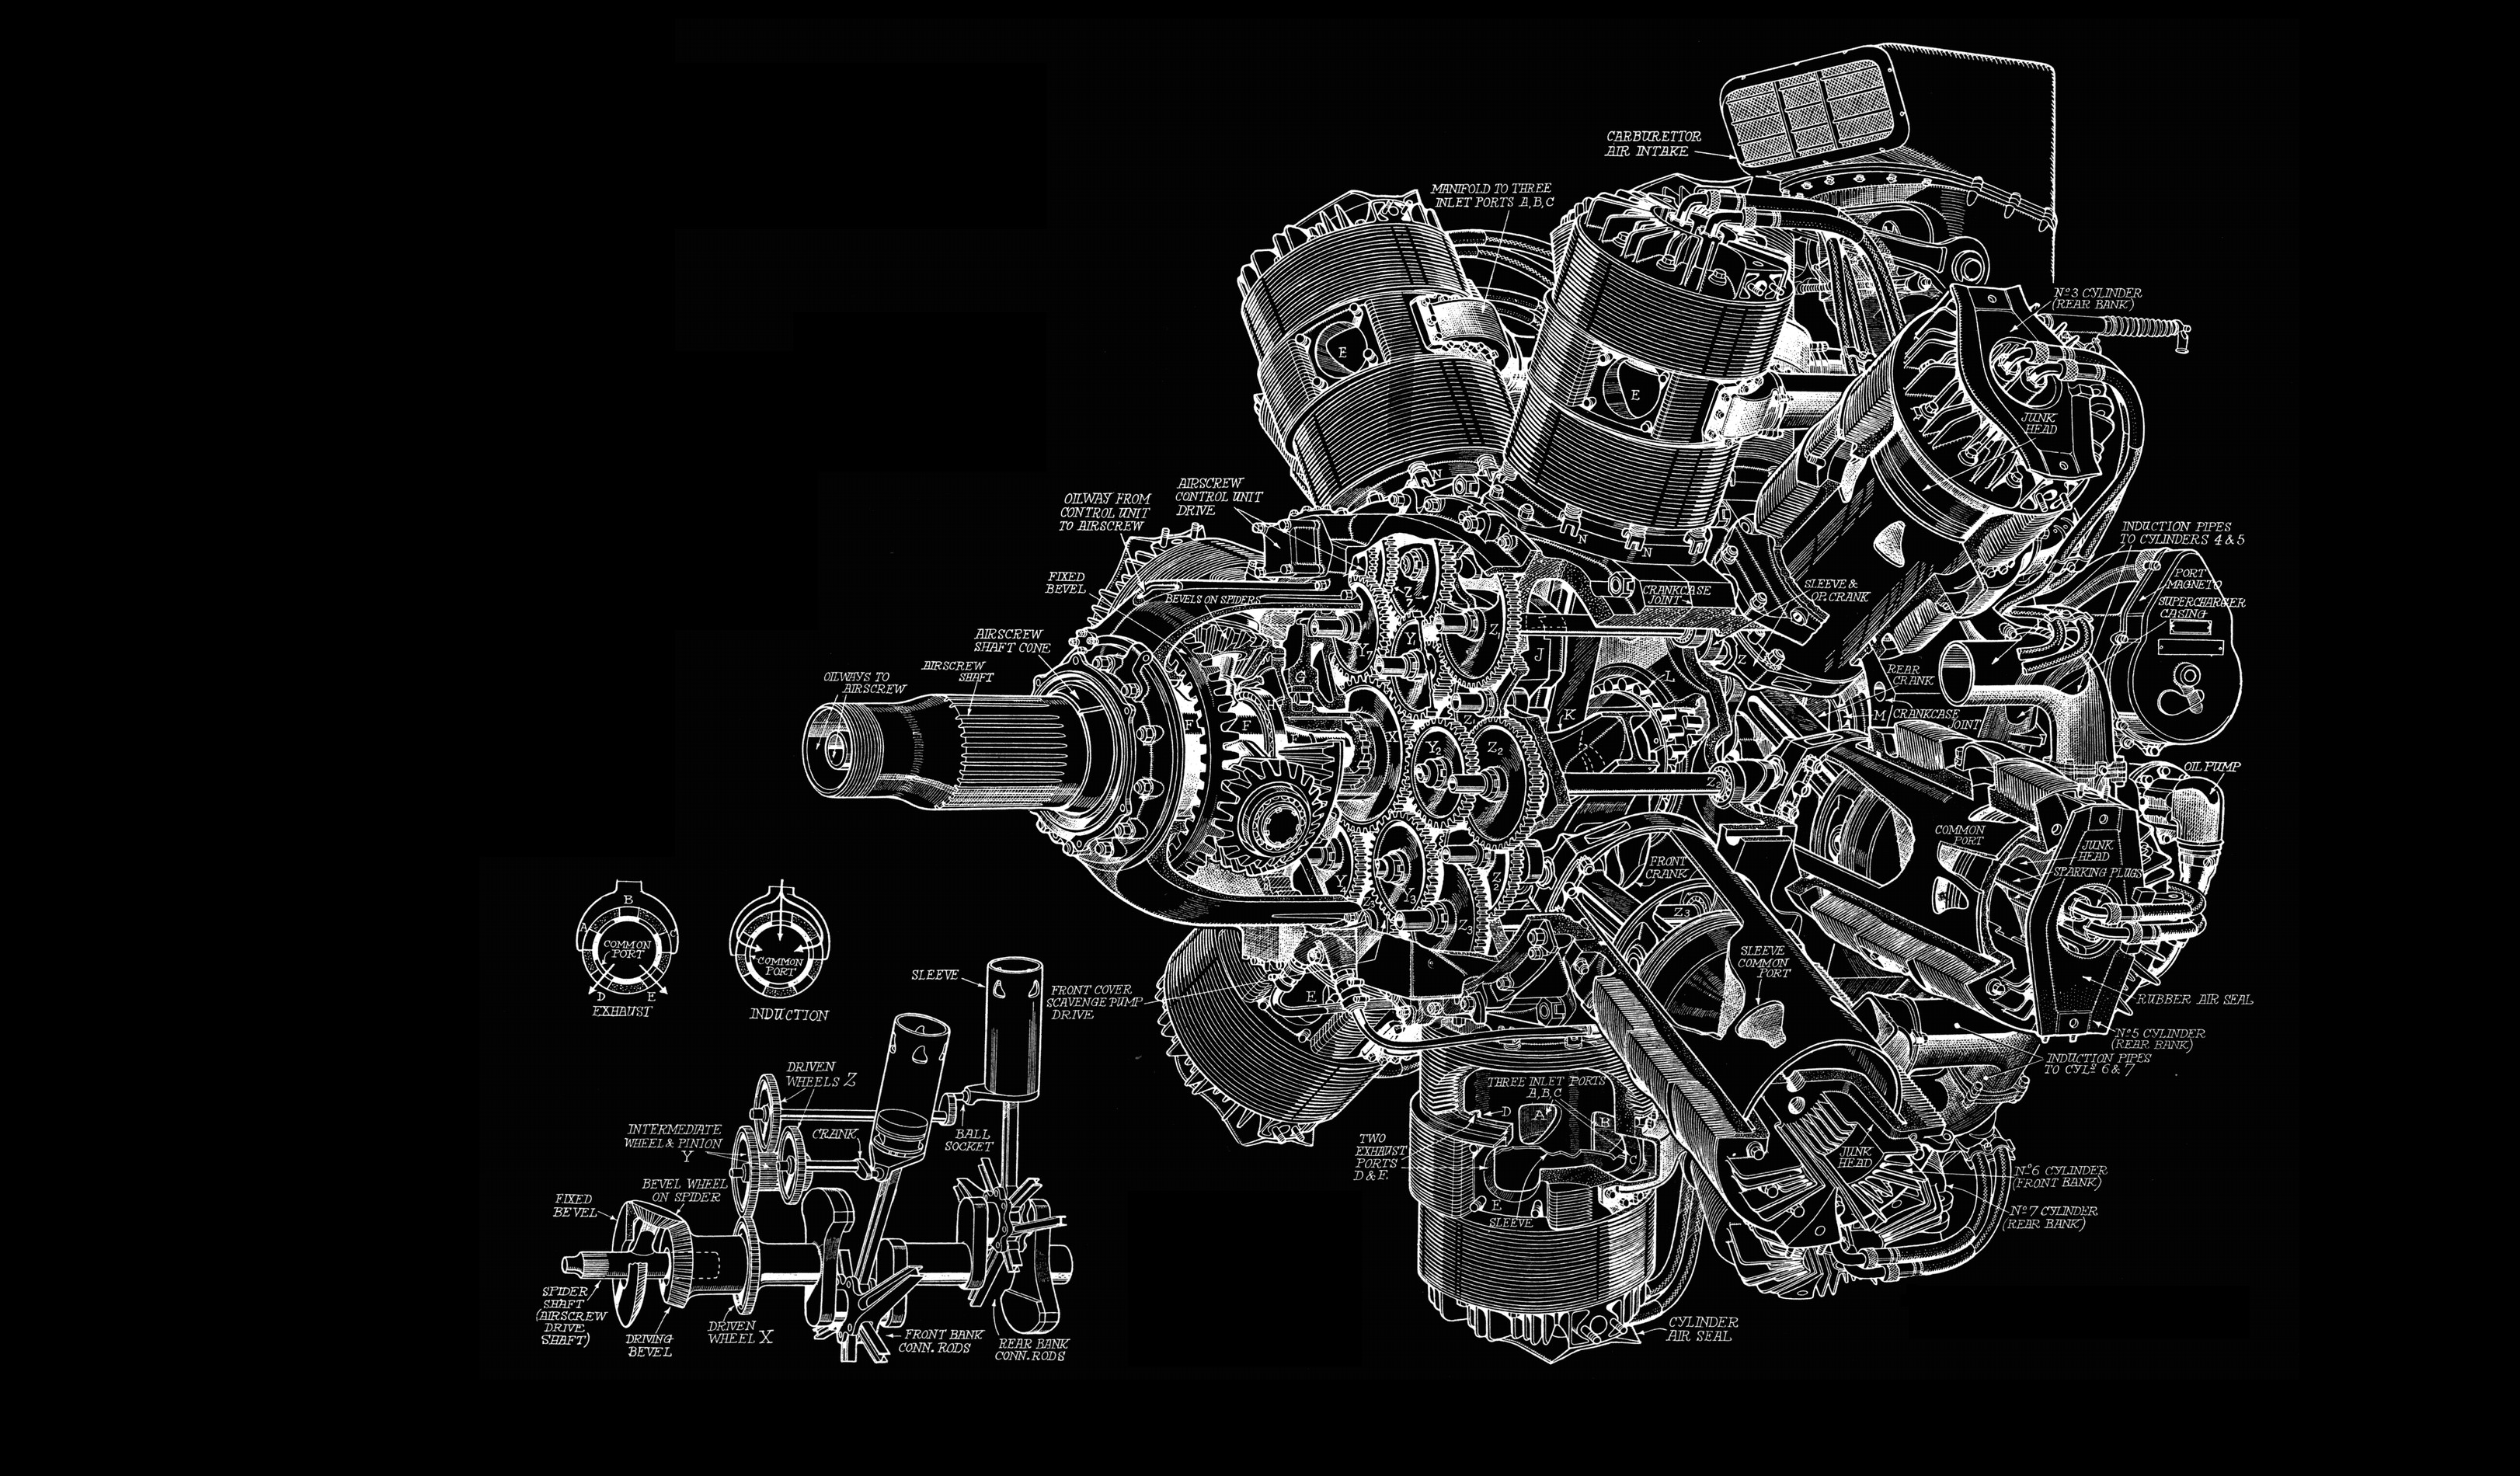 Radial Engine Diagram Scheme Of An Radial Engine [3244×1900] Aviation Of Radial Engine Diagram